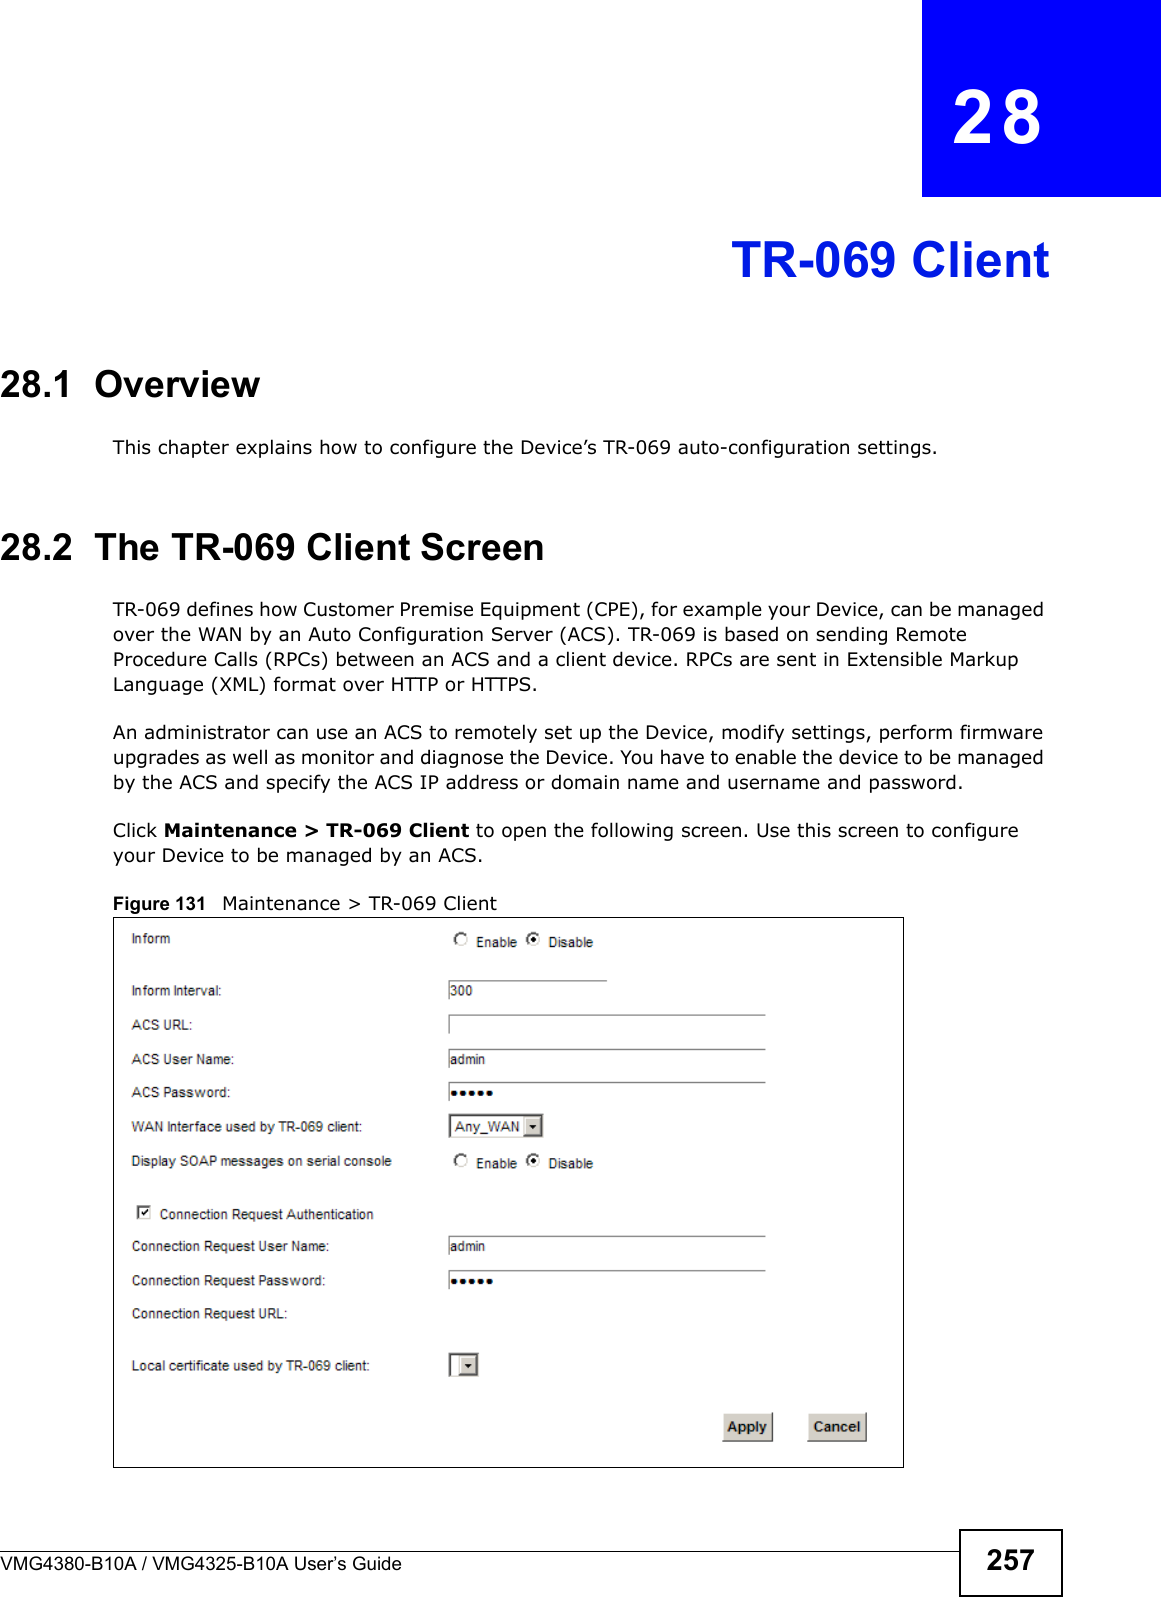 VMG4380-B10A / VMG4325-B10A User’s Guide 257CHAPTER  28TR-069 Client28.1  OverviewThis chapter explains how to configure the Device’s TR-069 auto-configuration settings.28.2  The TR-069 Client ScreenTR-069 defines how Customer Premise Equipment (CPE), for example your Device, can be managed over the WAN by an Auto Configuration Server (ACS). TR-069 is based on sending Remote Procedure Calls (RPCs) between an ACS and a client device. RPCs are sent in Extensible Markup Language (XML) format over HTTP or HTTPS.An administrator can use an ACS to remotely set up the Device, modify settings, perform firmware upgrades as well as monitor and diagnose the Device. You have to enable the device to be managed by the ACS and specify the ACS IP address or domain name and username and password.Click Maintenance &gt; TR-069 Client to open the following screen. Use this screen to configure your Device to be managed by an ACS.Figure 131   Maintenance &gt; TR-069 Client 